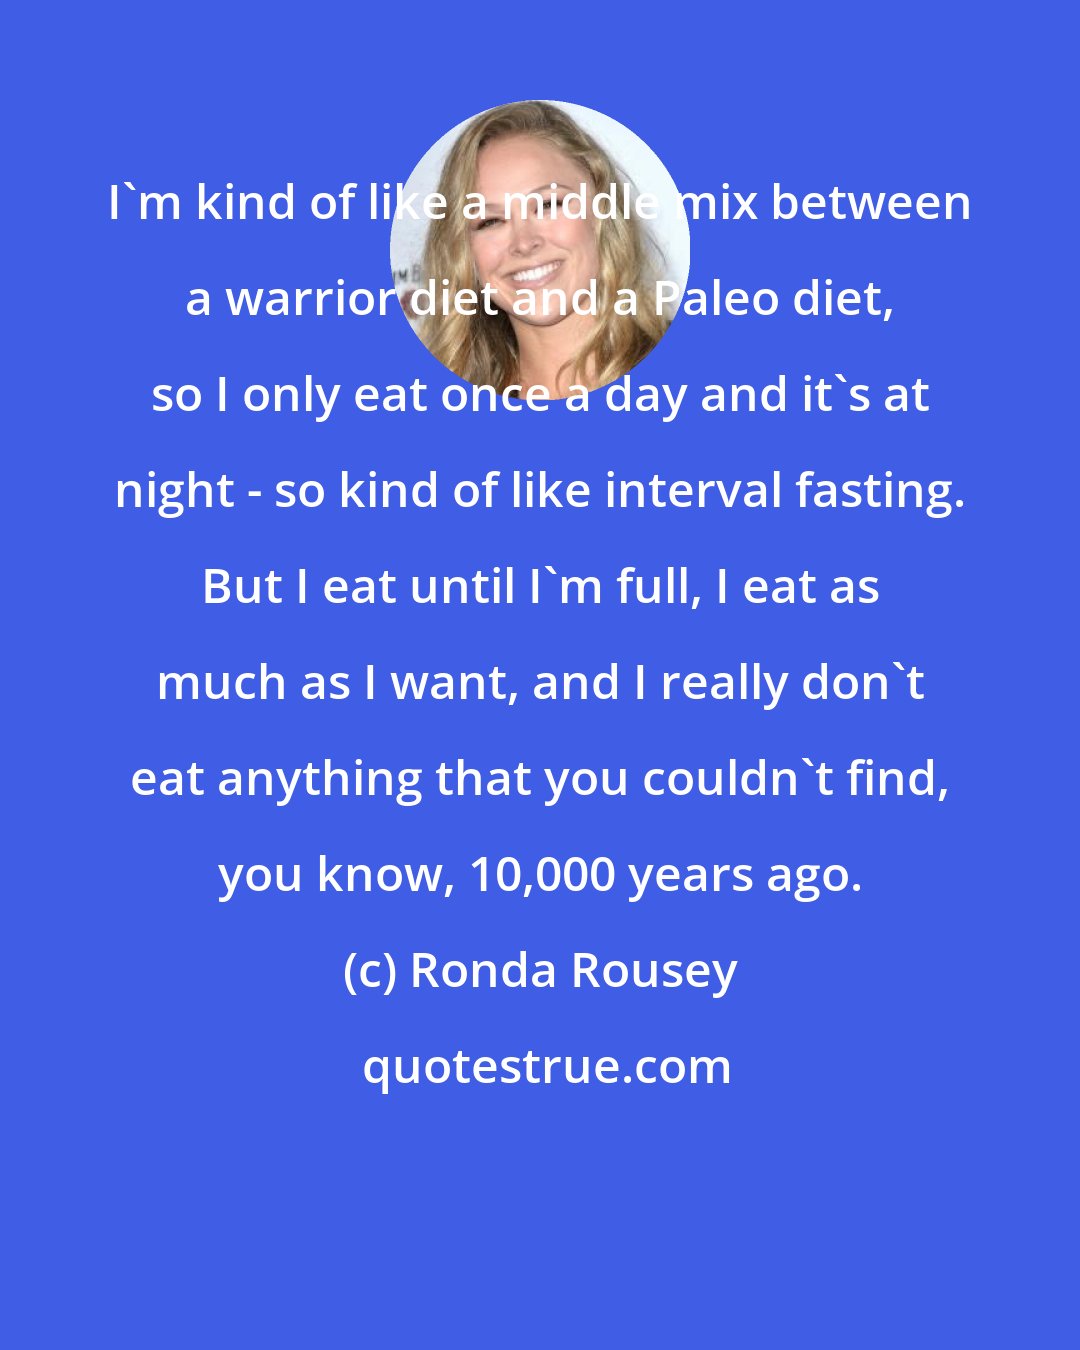 Ronda Rousey: I'm kind of like a middle mix between a warrior diet and a Paleo diet, so I only eat once a day and it's at night - so kind of like interval fasting. But I eat until I'm full, I eat as much as I want, and I really don't eat anything that you couldn't find, you know, 10,000 years ago.